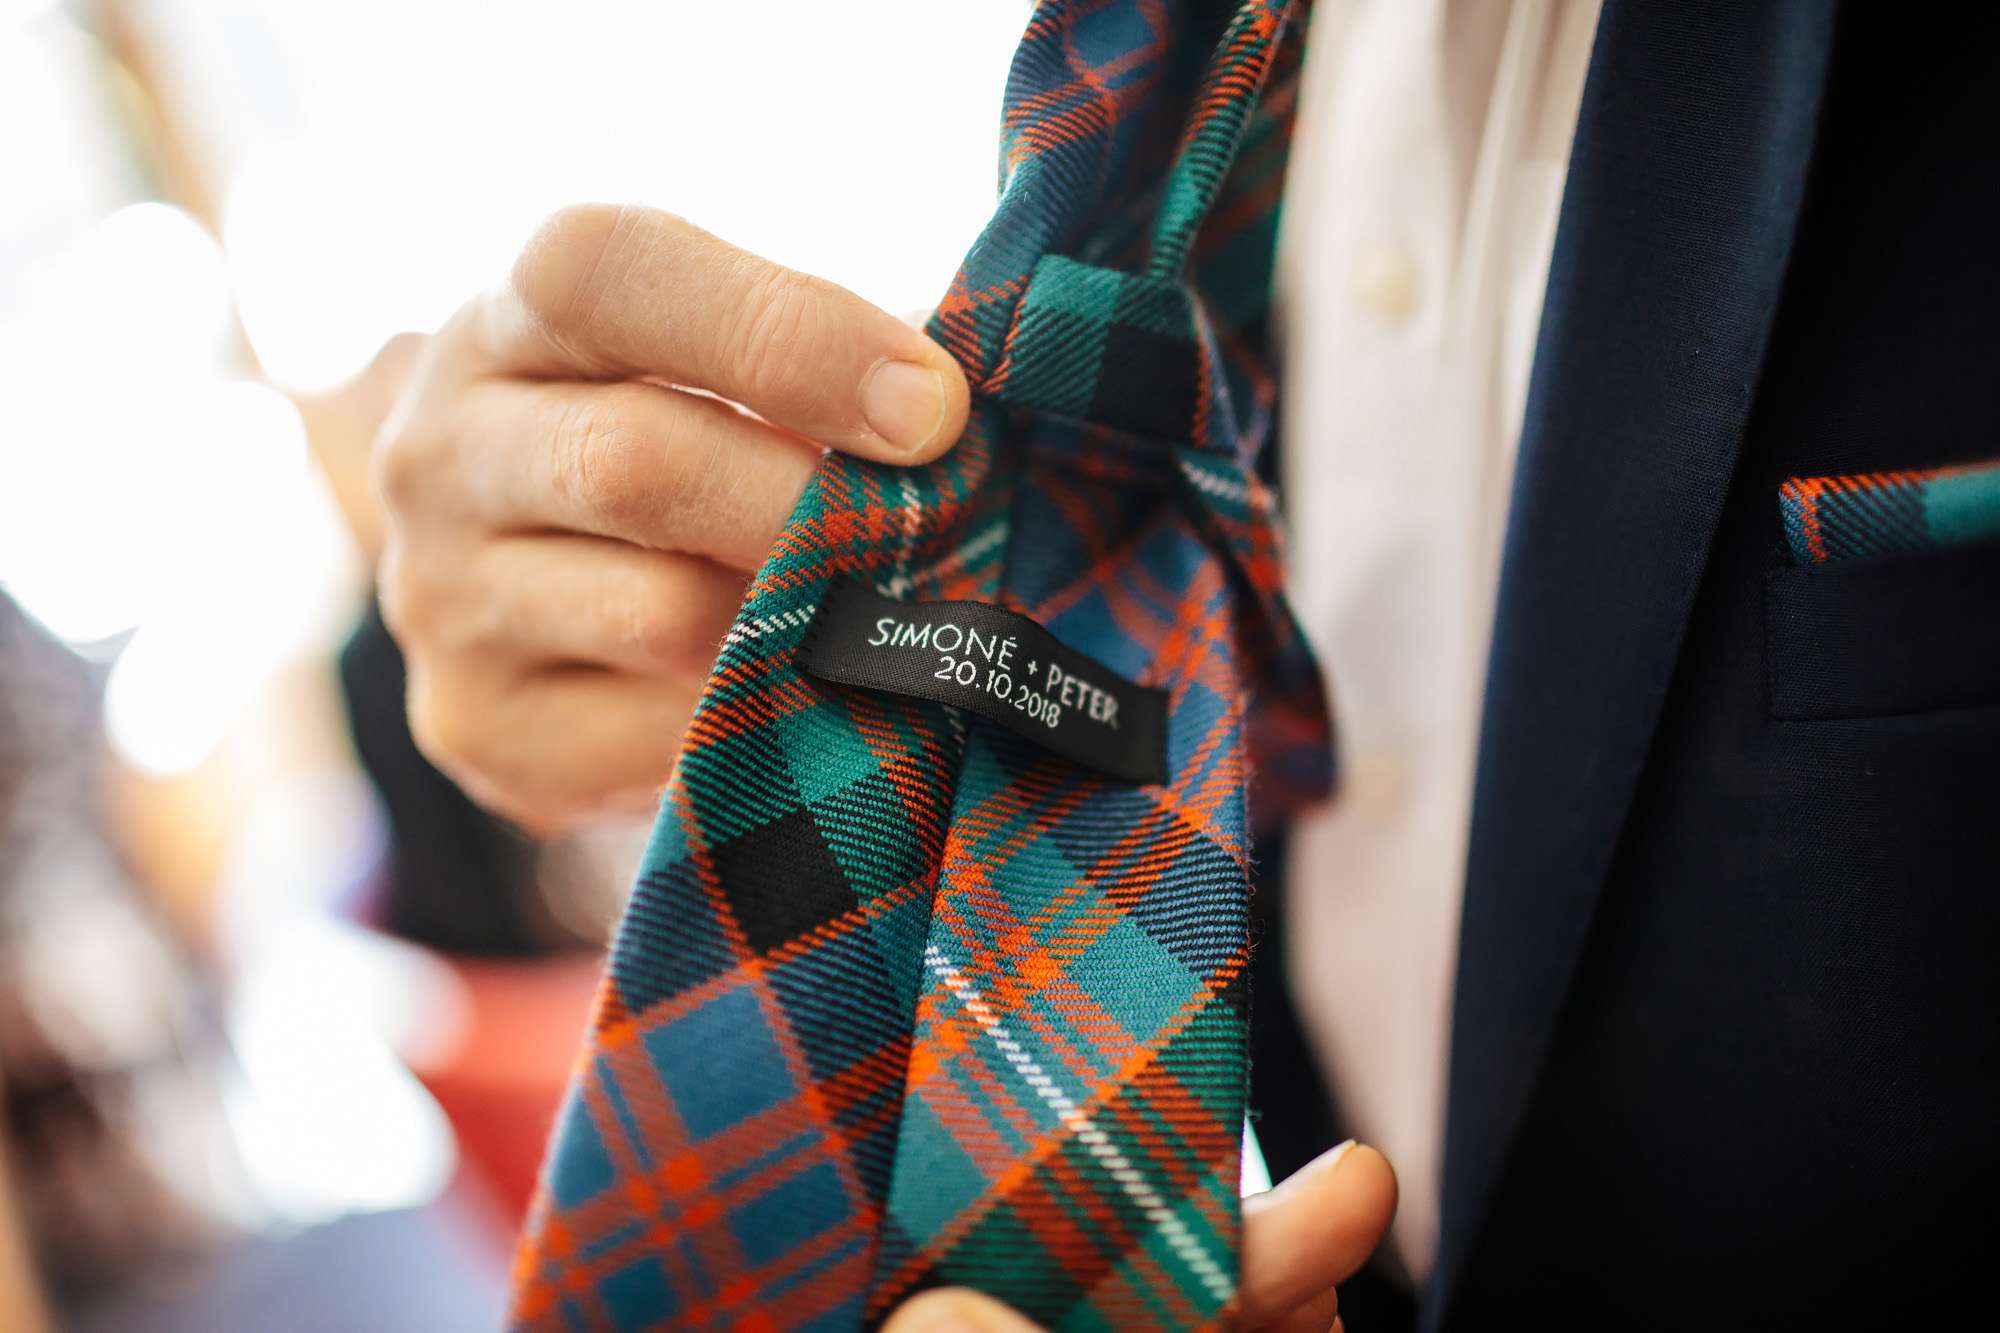 Groom has name and date embroidered on his tie